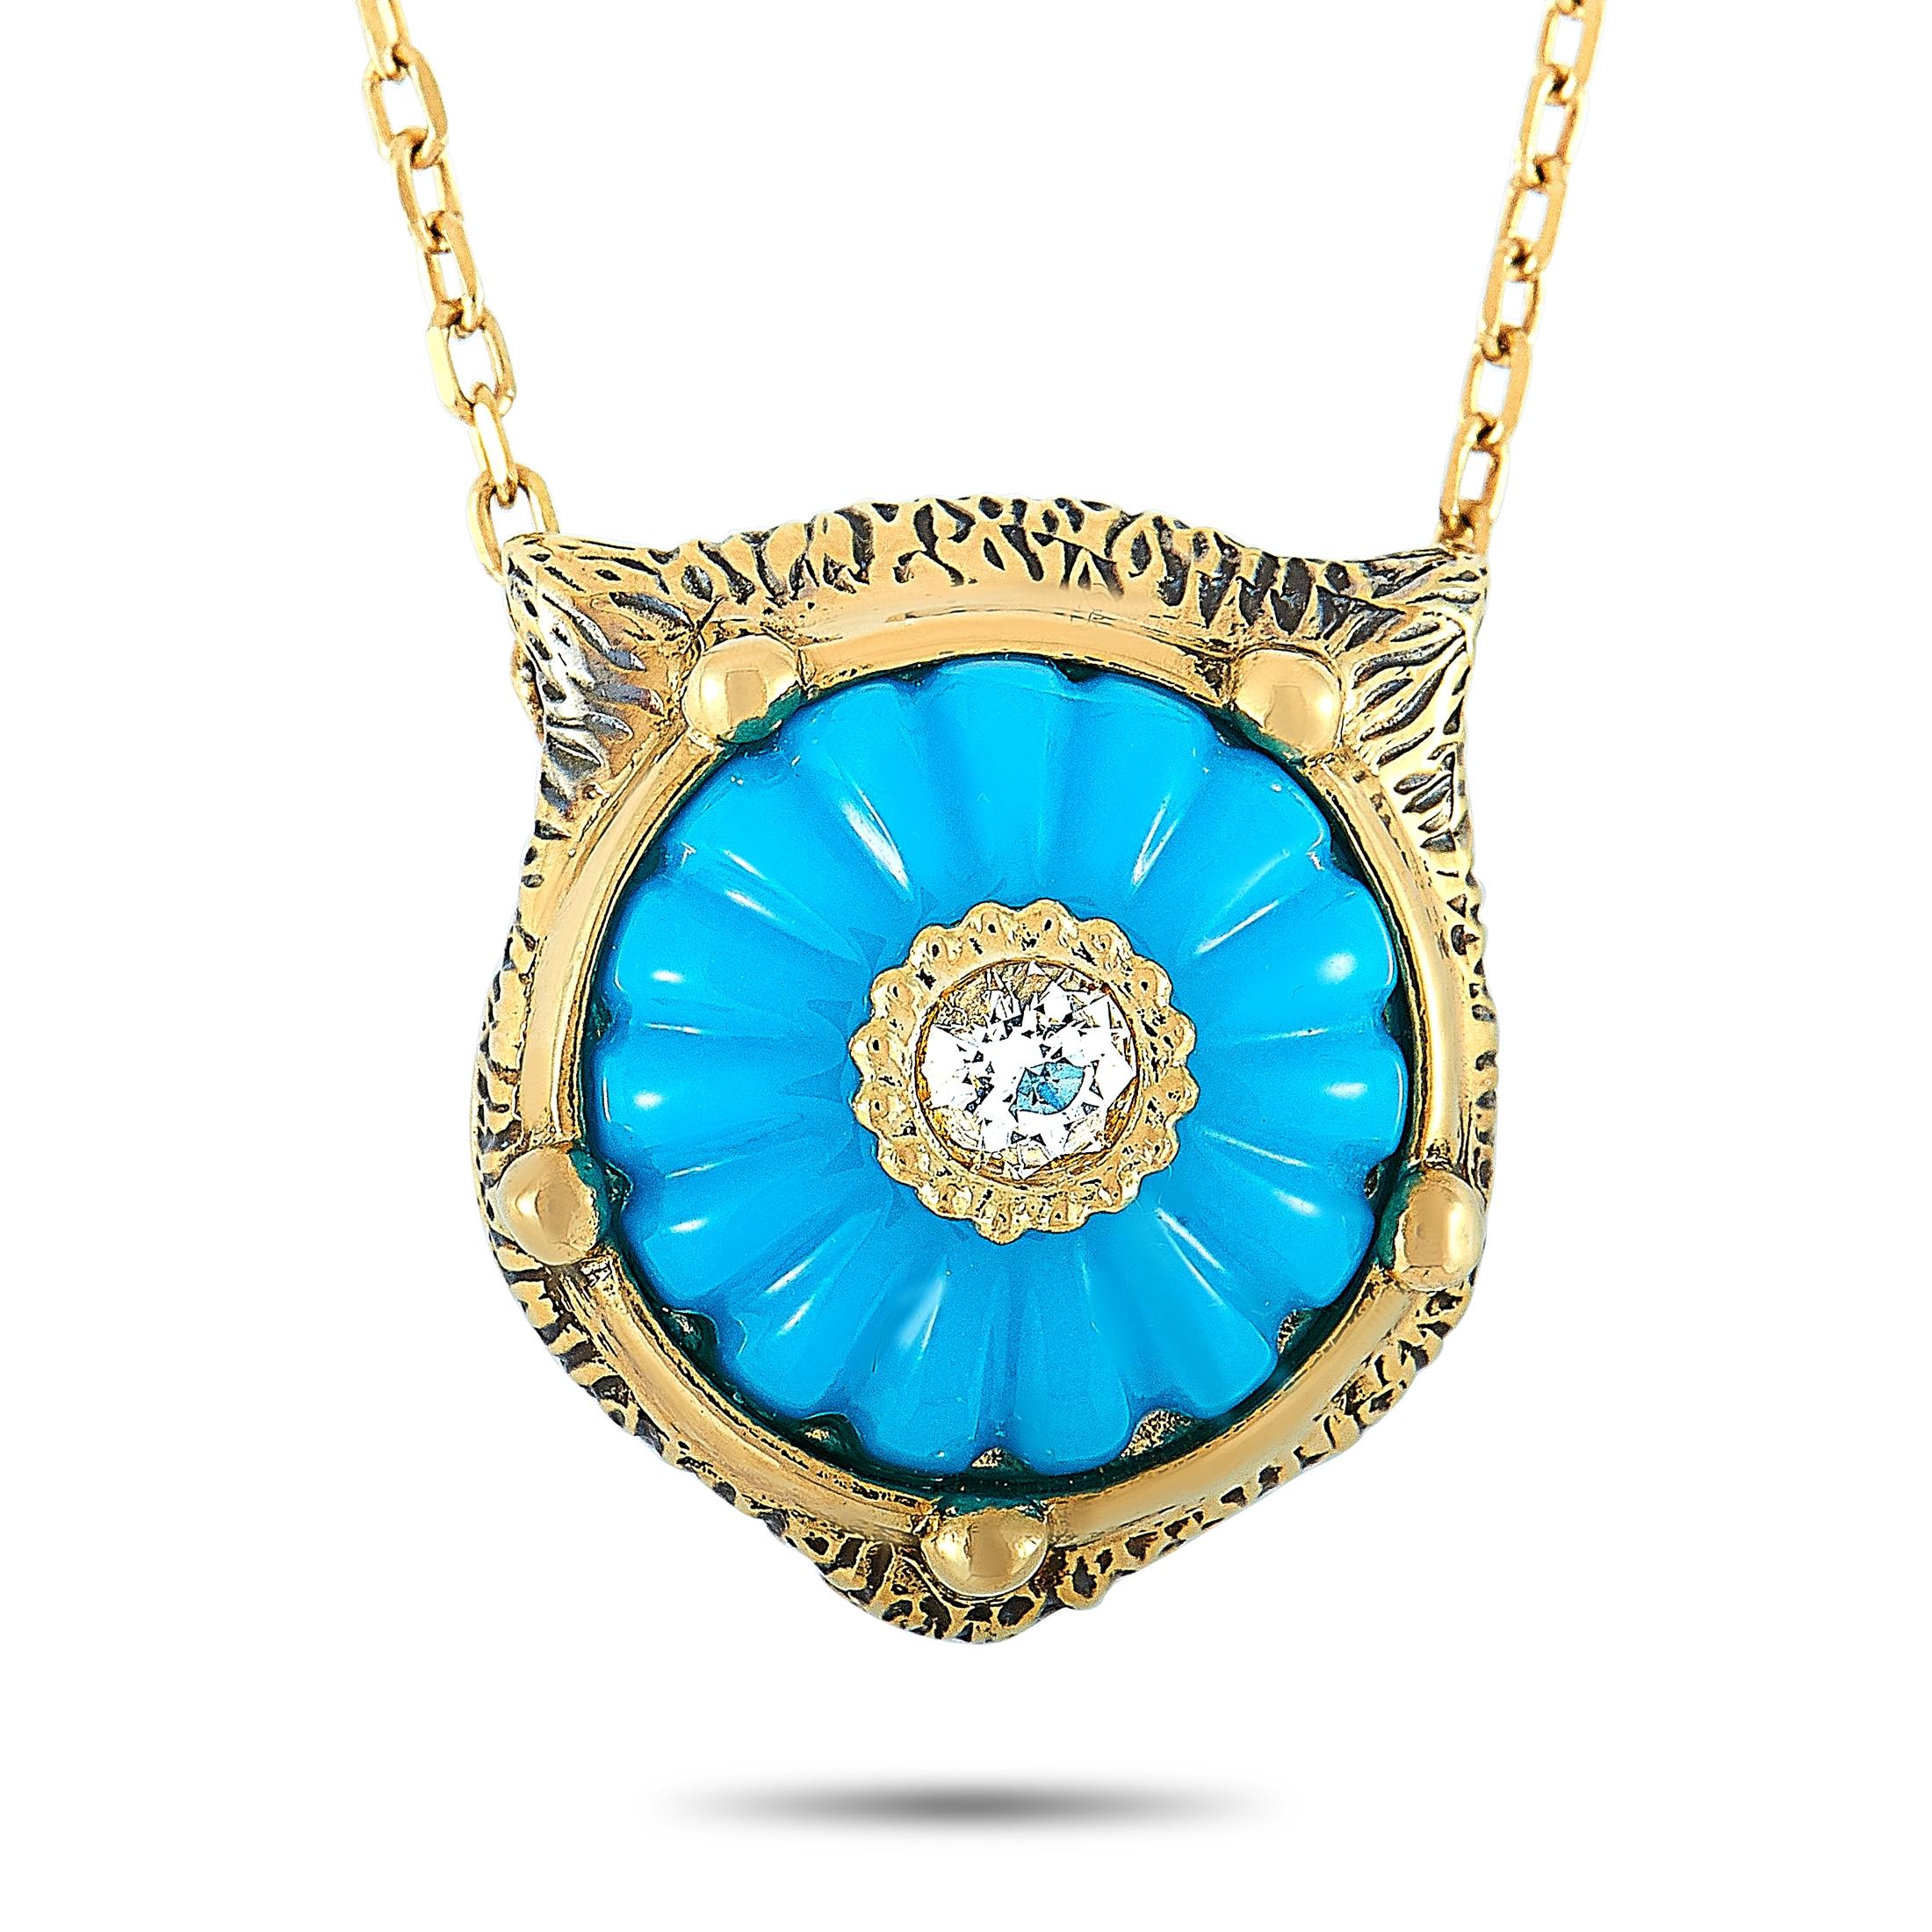 The Gucci “LMDM” necklace is made of 18K yellow gold and decorated with diamonds and a turquoise. The turquoise weighs approximately 2.25 carats and the diamonds feature GH color and VVS clarity and amount to approximately 0.09 carats. The necklace